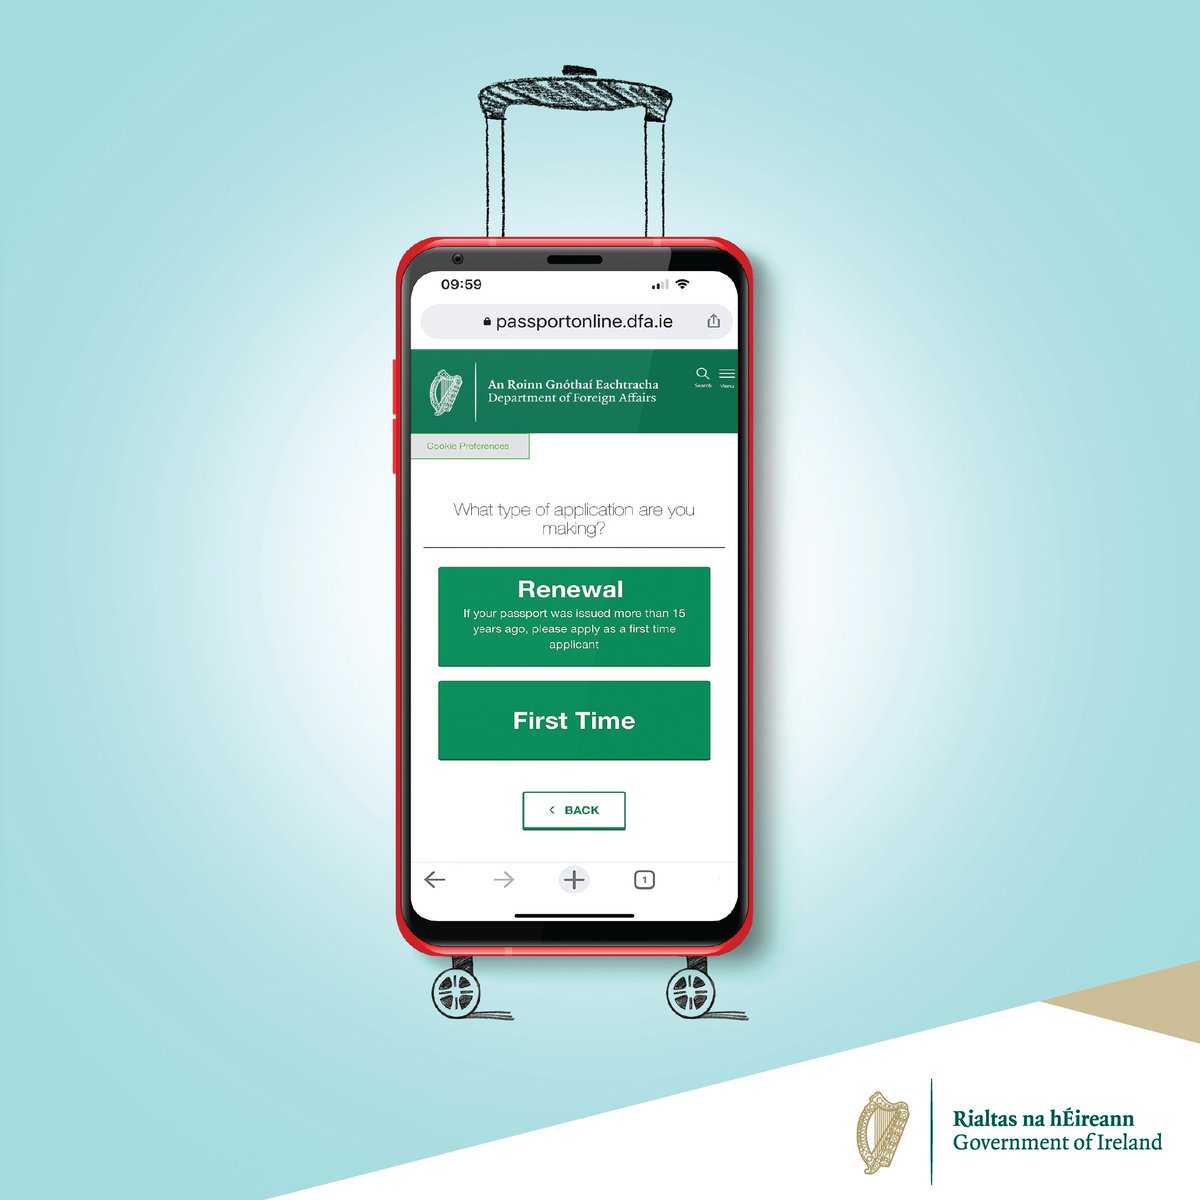 👀#LookBeforeYouBook
🎄Planning a trip home for Christmas? 
⚠️Ensure passports are in-date before you book flights and hotel
👉Apply here: passportonline.dfa.ie/Apply/Passport @PassportIRL #passportonline #globalireland